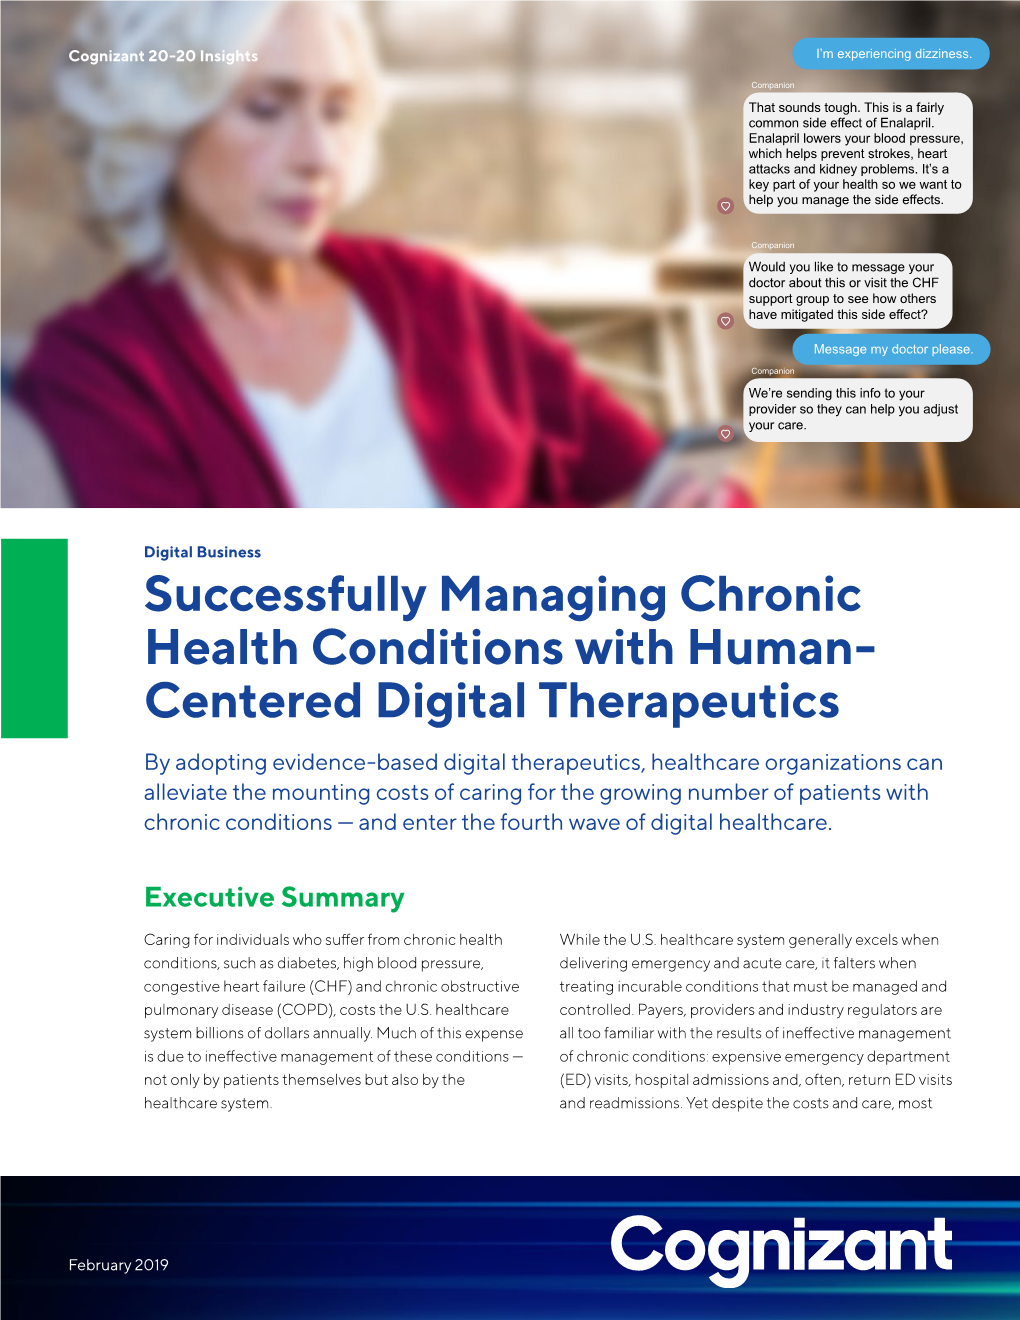 Successfully Managing Chronic Health Conditions with Human